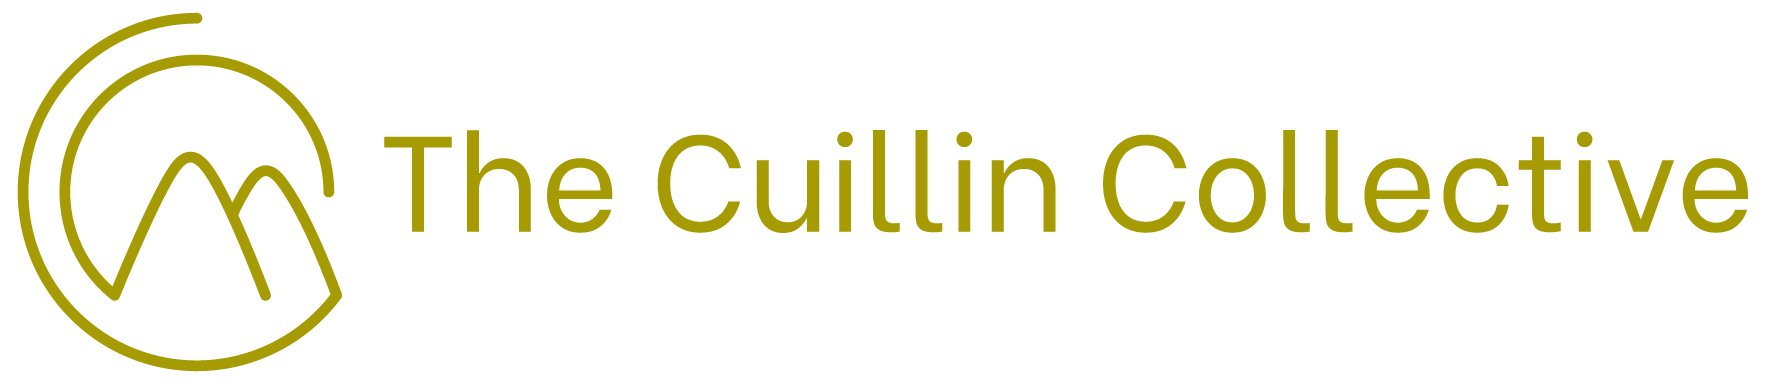 logo_website_thecuillincollective